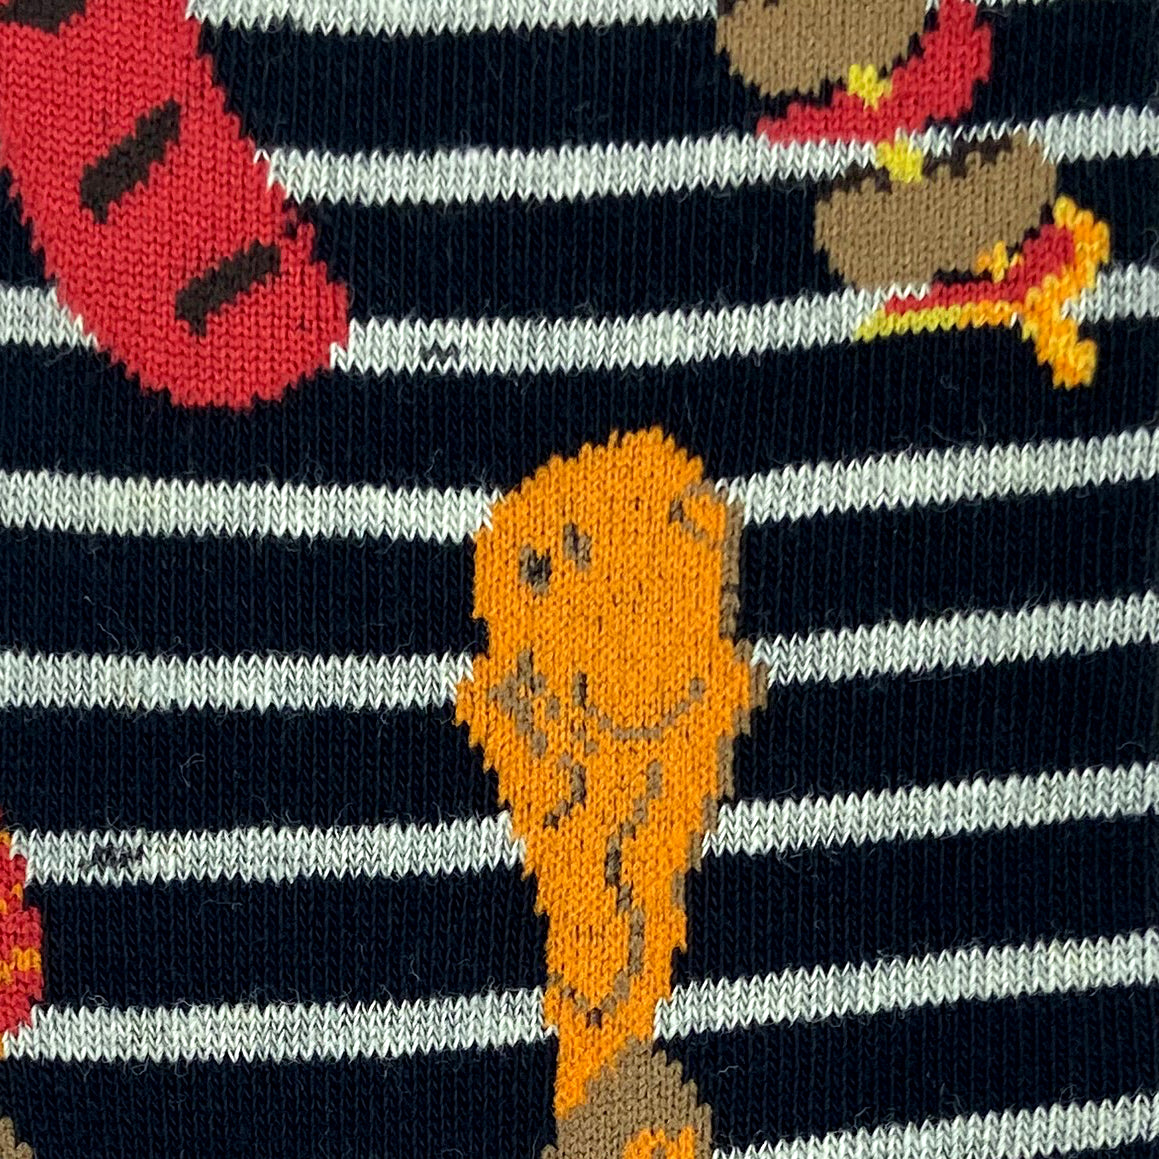 Black BBQ Grill Barbeque Themed Sausage Patty Print Novelty Crew Socks